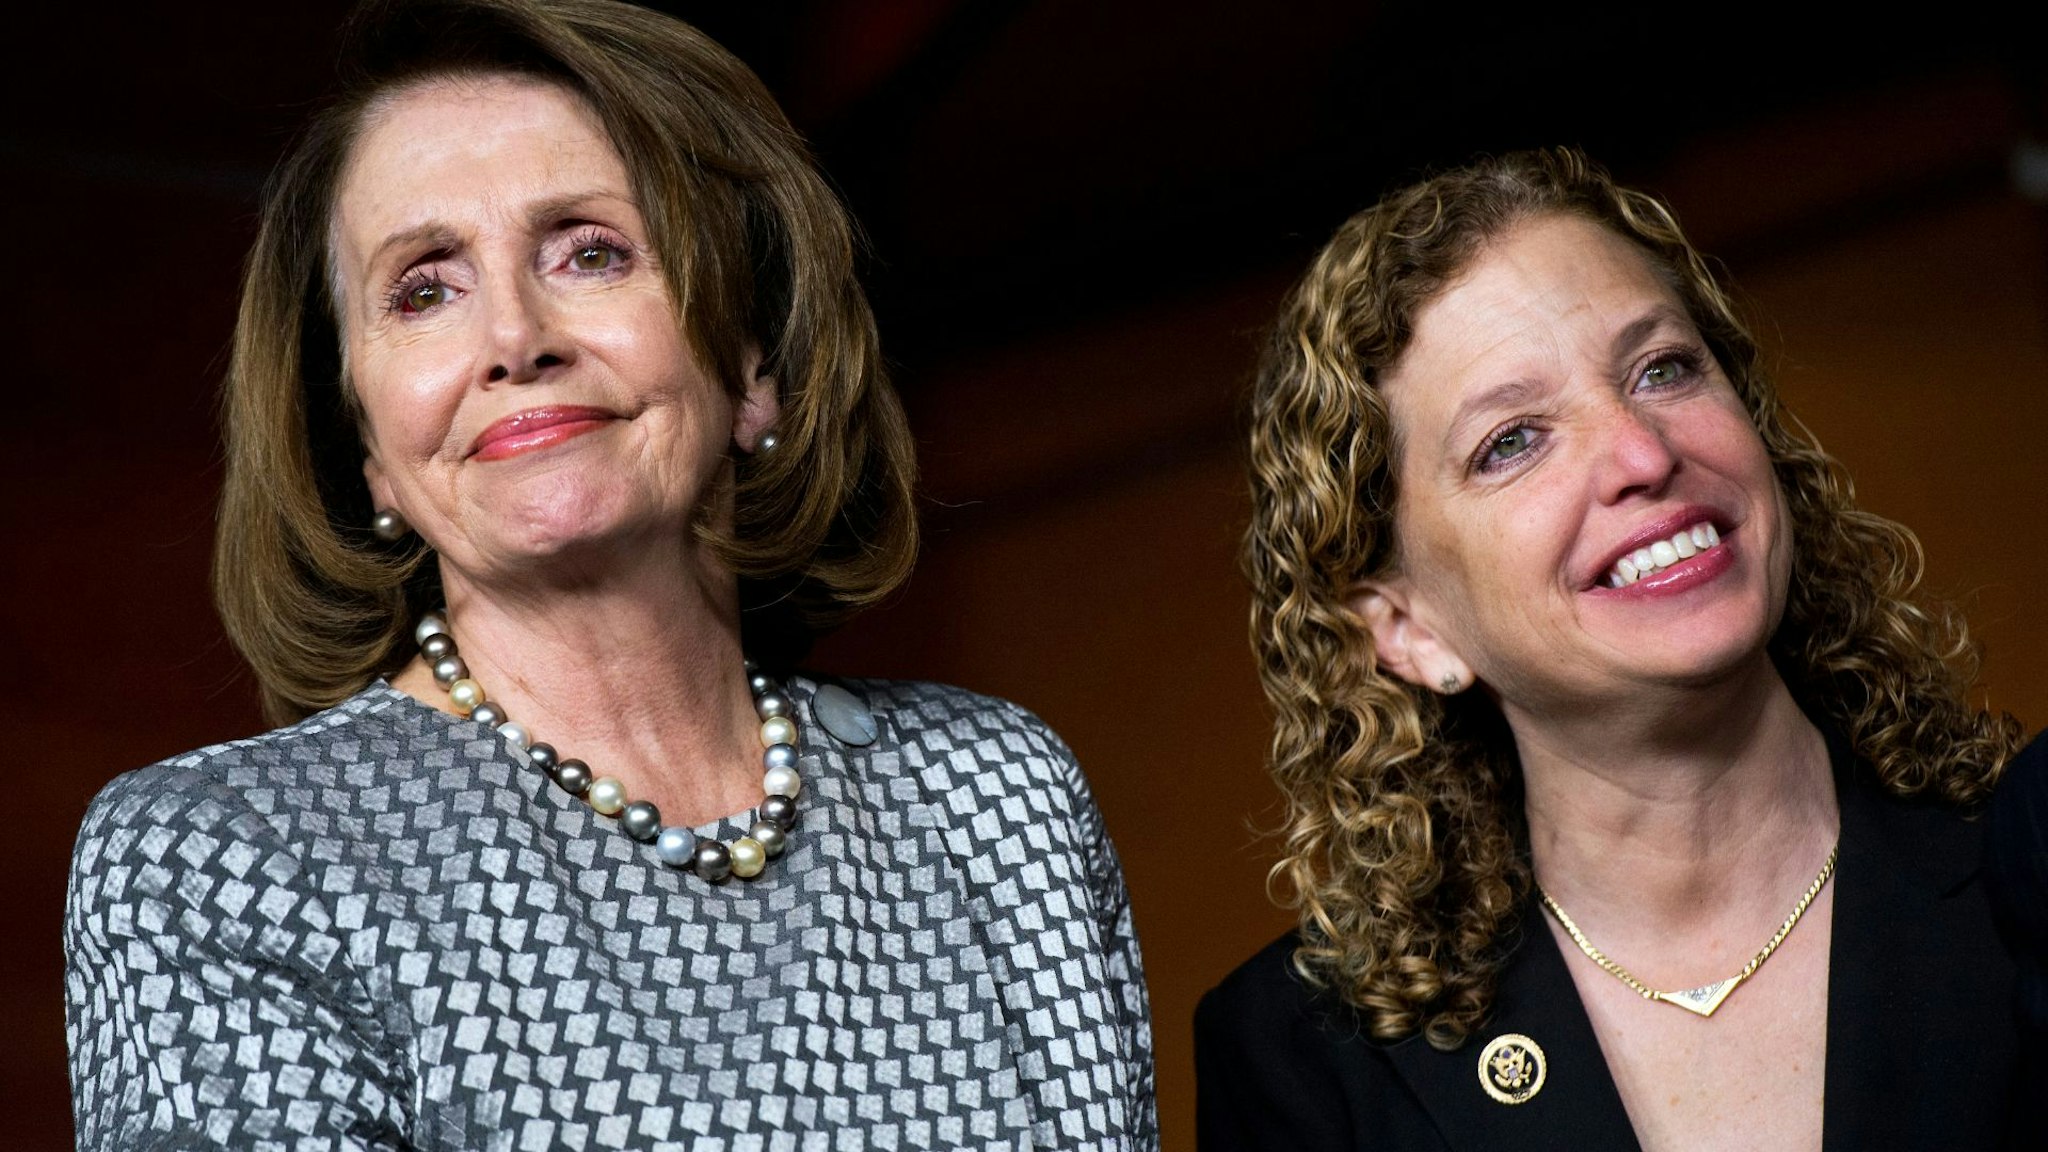 UNITED STATES - APRIL 28: House Minority Leader Nancy Pelosi, D-Calif., left, and Rep. Debbie Wasserman Schultz, D-Fla., attend a news conference in Capitol Visitor Center on the Equality Act which would "extend anti-discrimination protections to LGBT individuals," April 28, 2016.